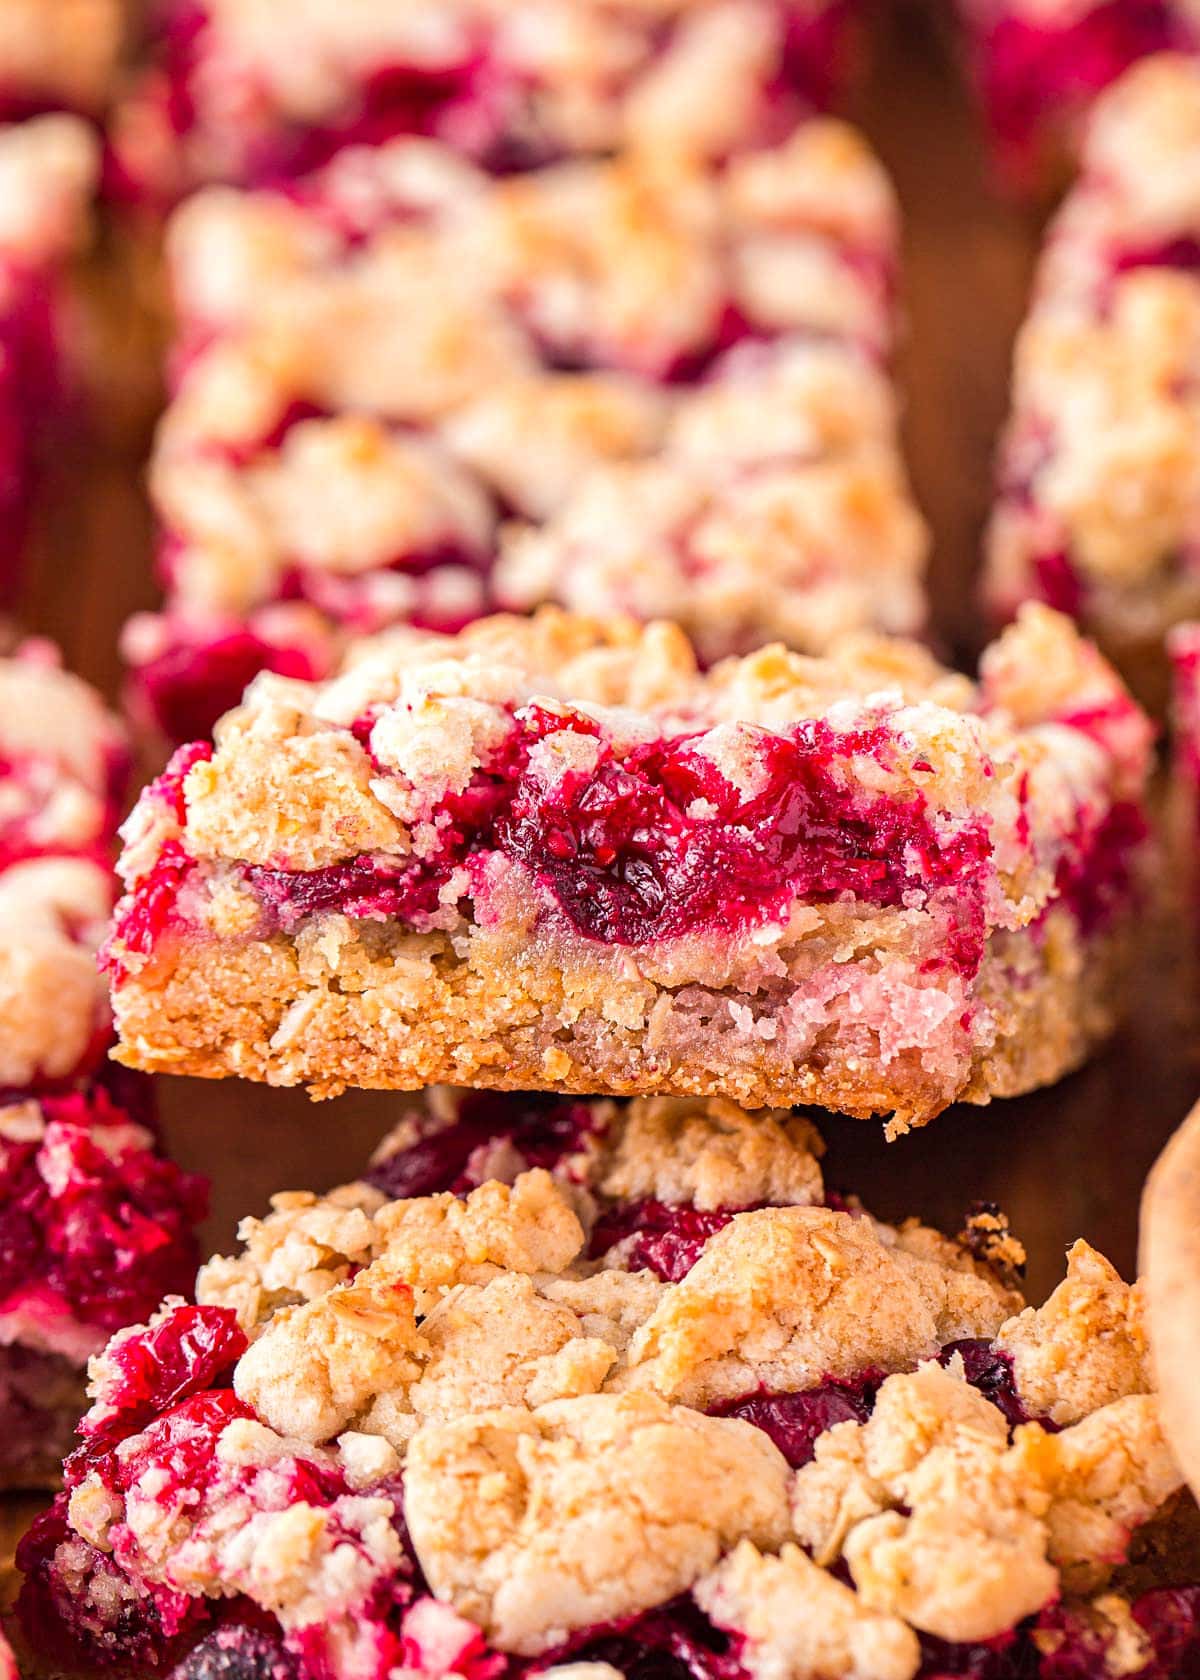 cranberry bars on a wood board with the center bar flipped up so the filling takes center stage and you can see the profile of the bar.